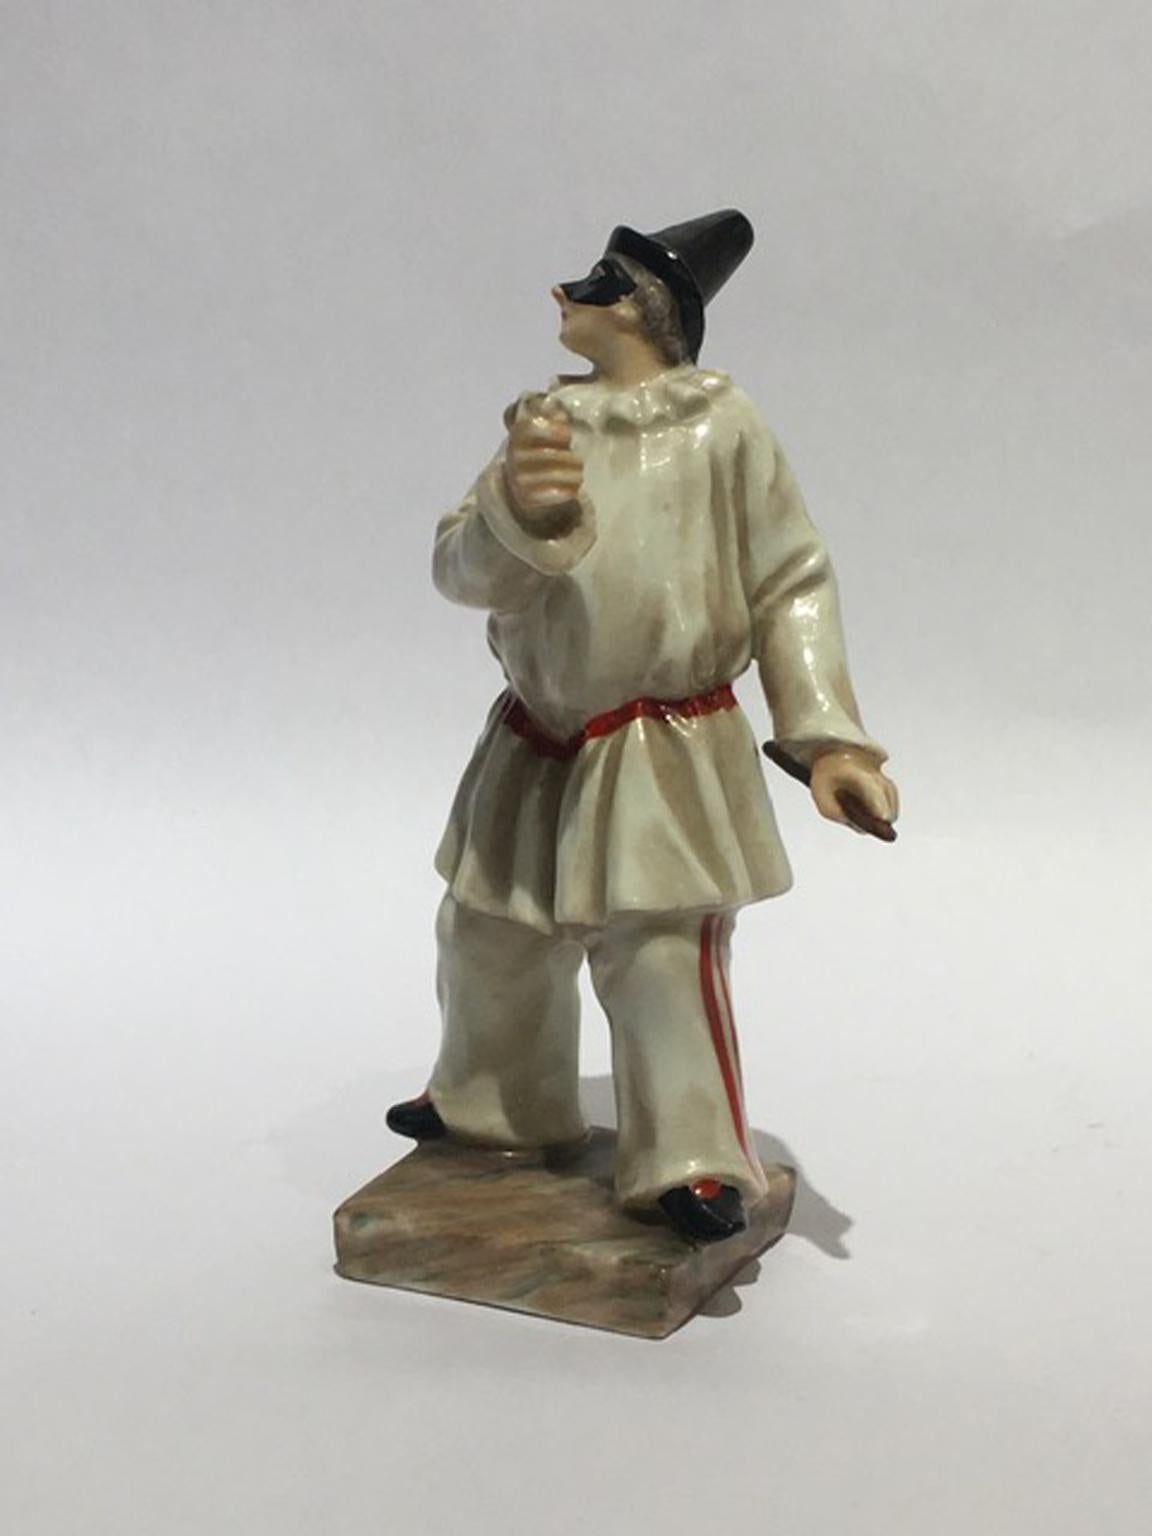 Hand-Crafted Italy Mid-18th Century Porcelain Pulcinella Figurine